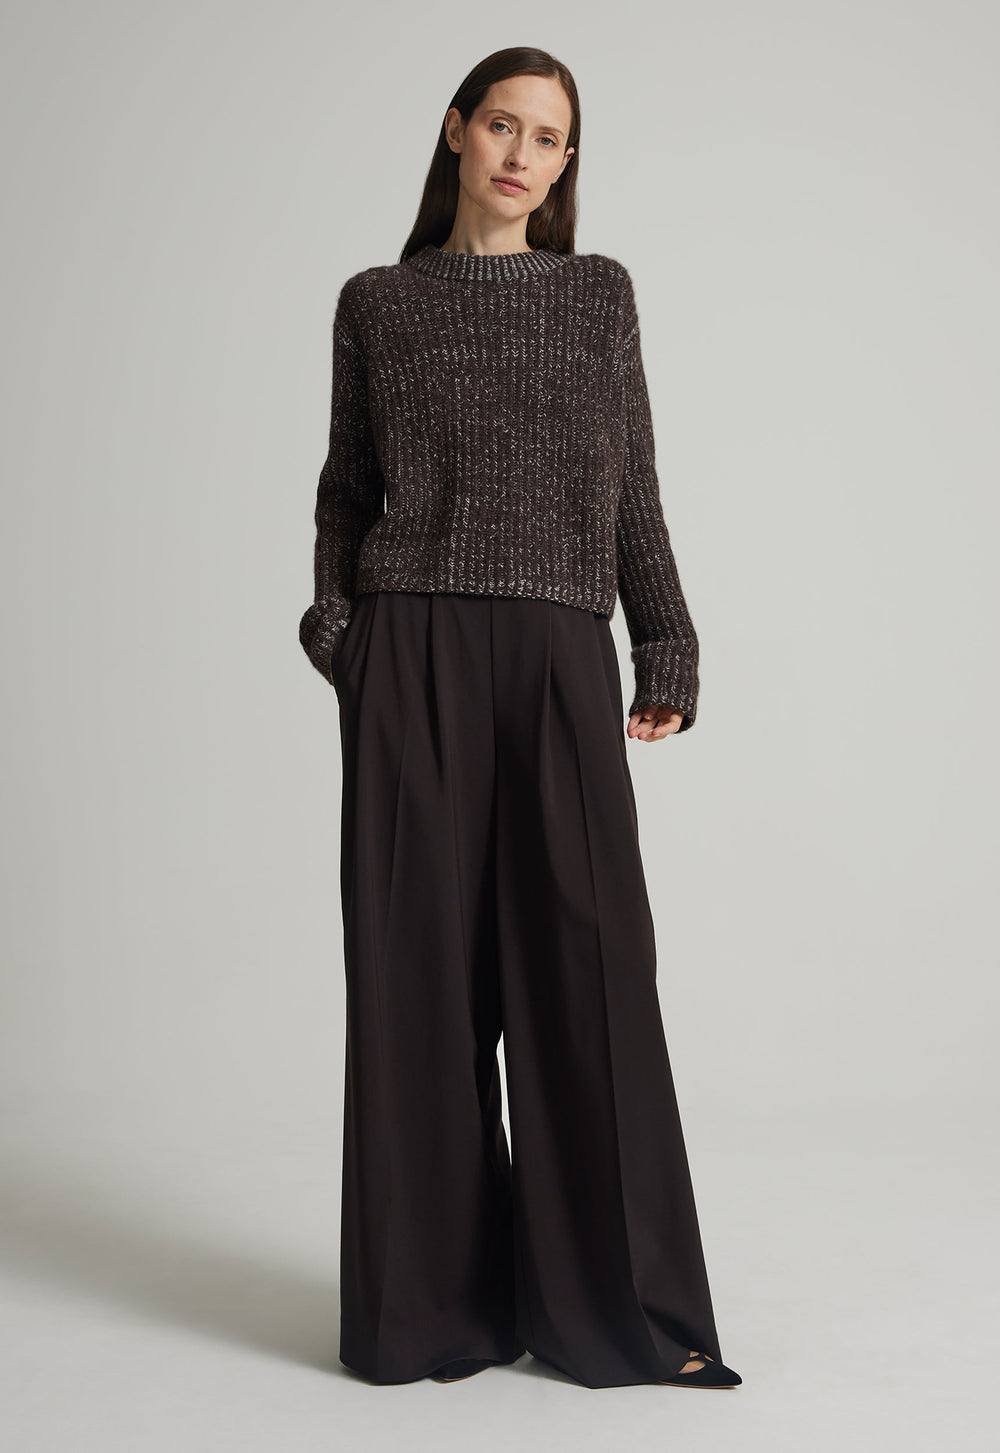 Jac+Jack HAYES CASHMERE SWEATER in Peppercorn Marle/whisper